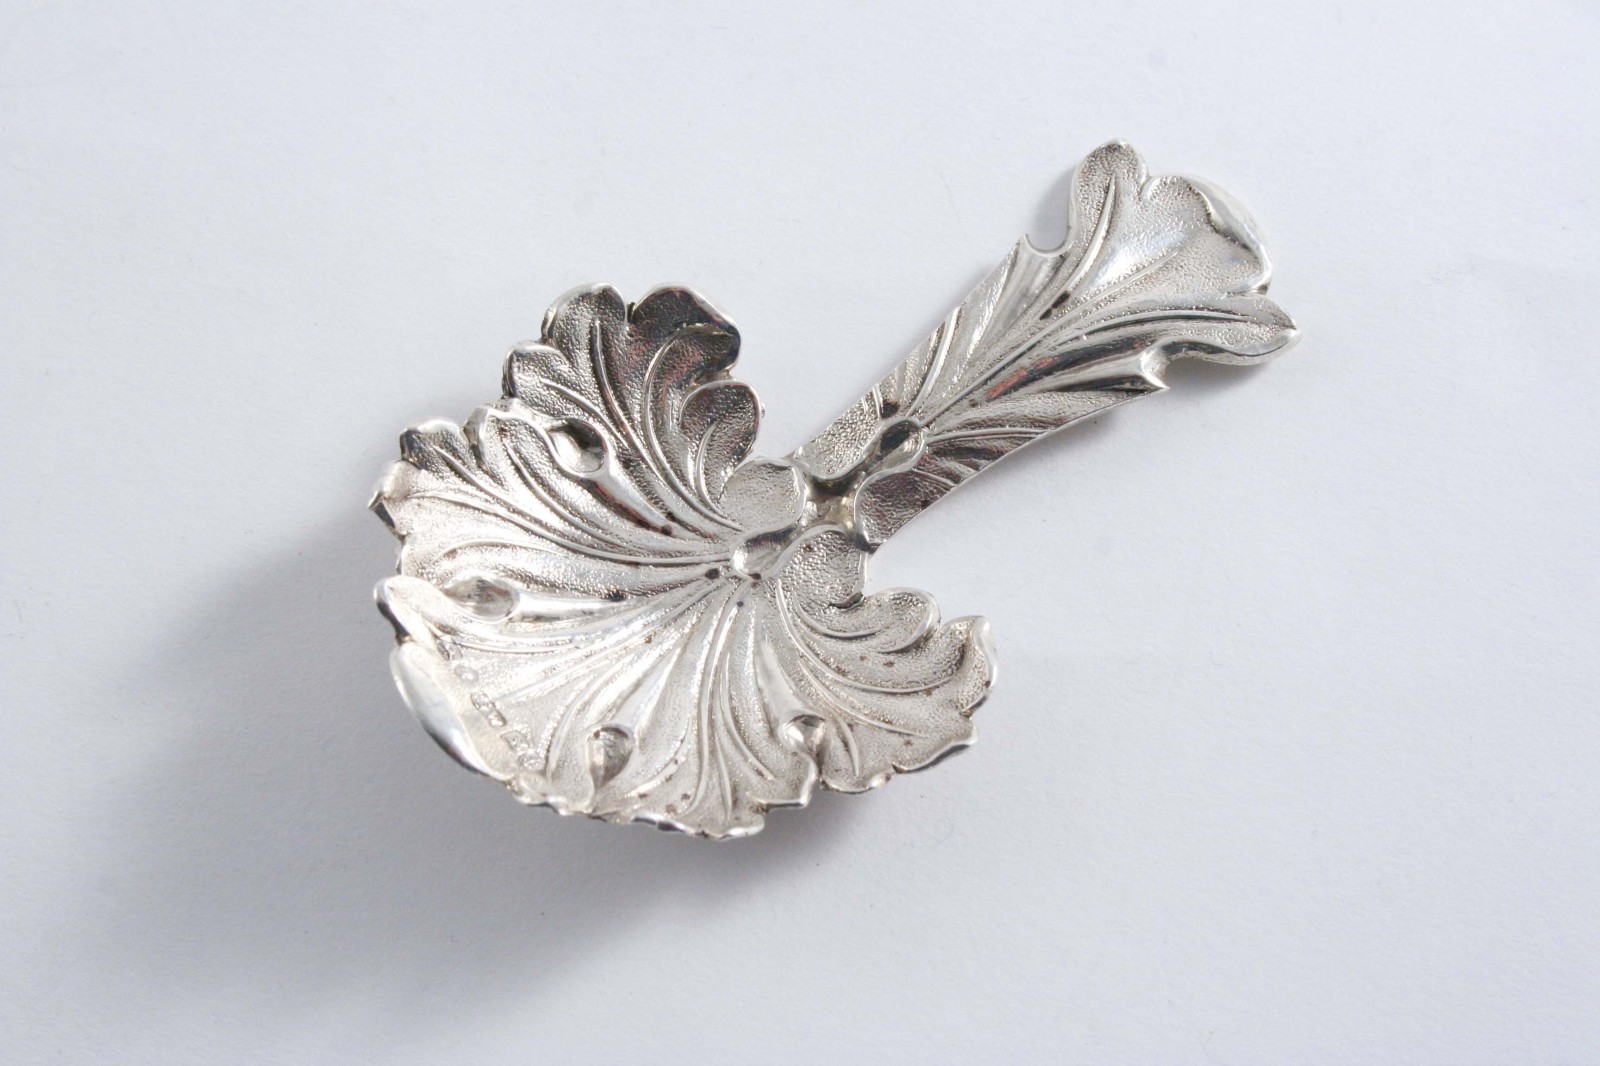 AN EARLY VICTORIAN CADDY SPOON with a leaf bowl & a foliate stem, by Gervaise Wheeler, Birmingham